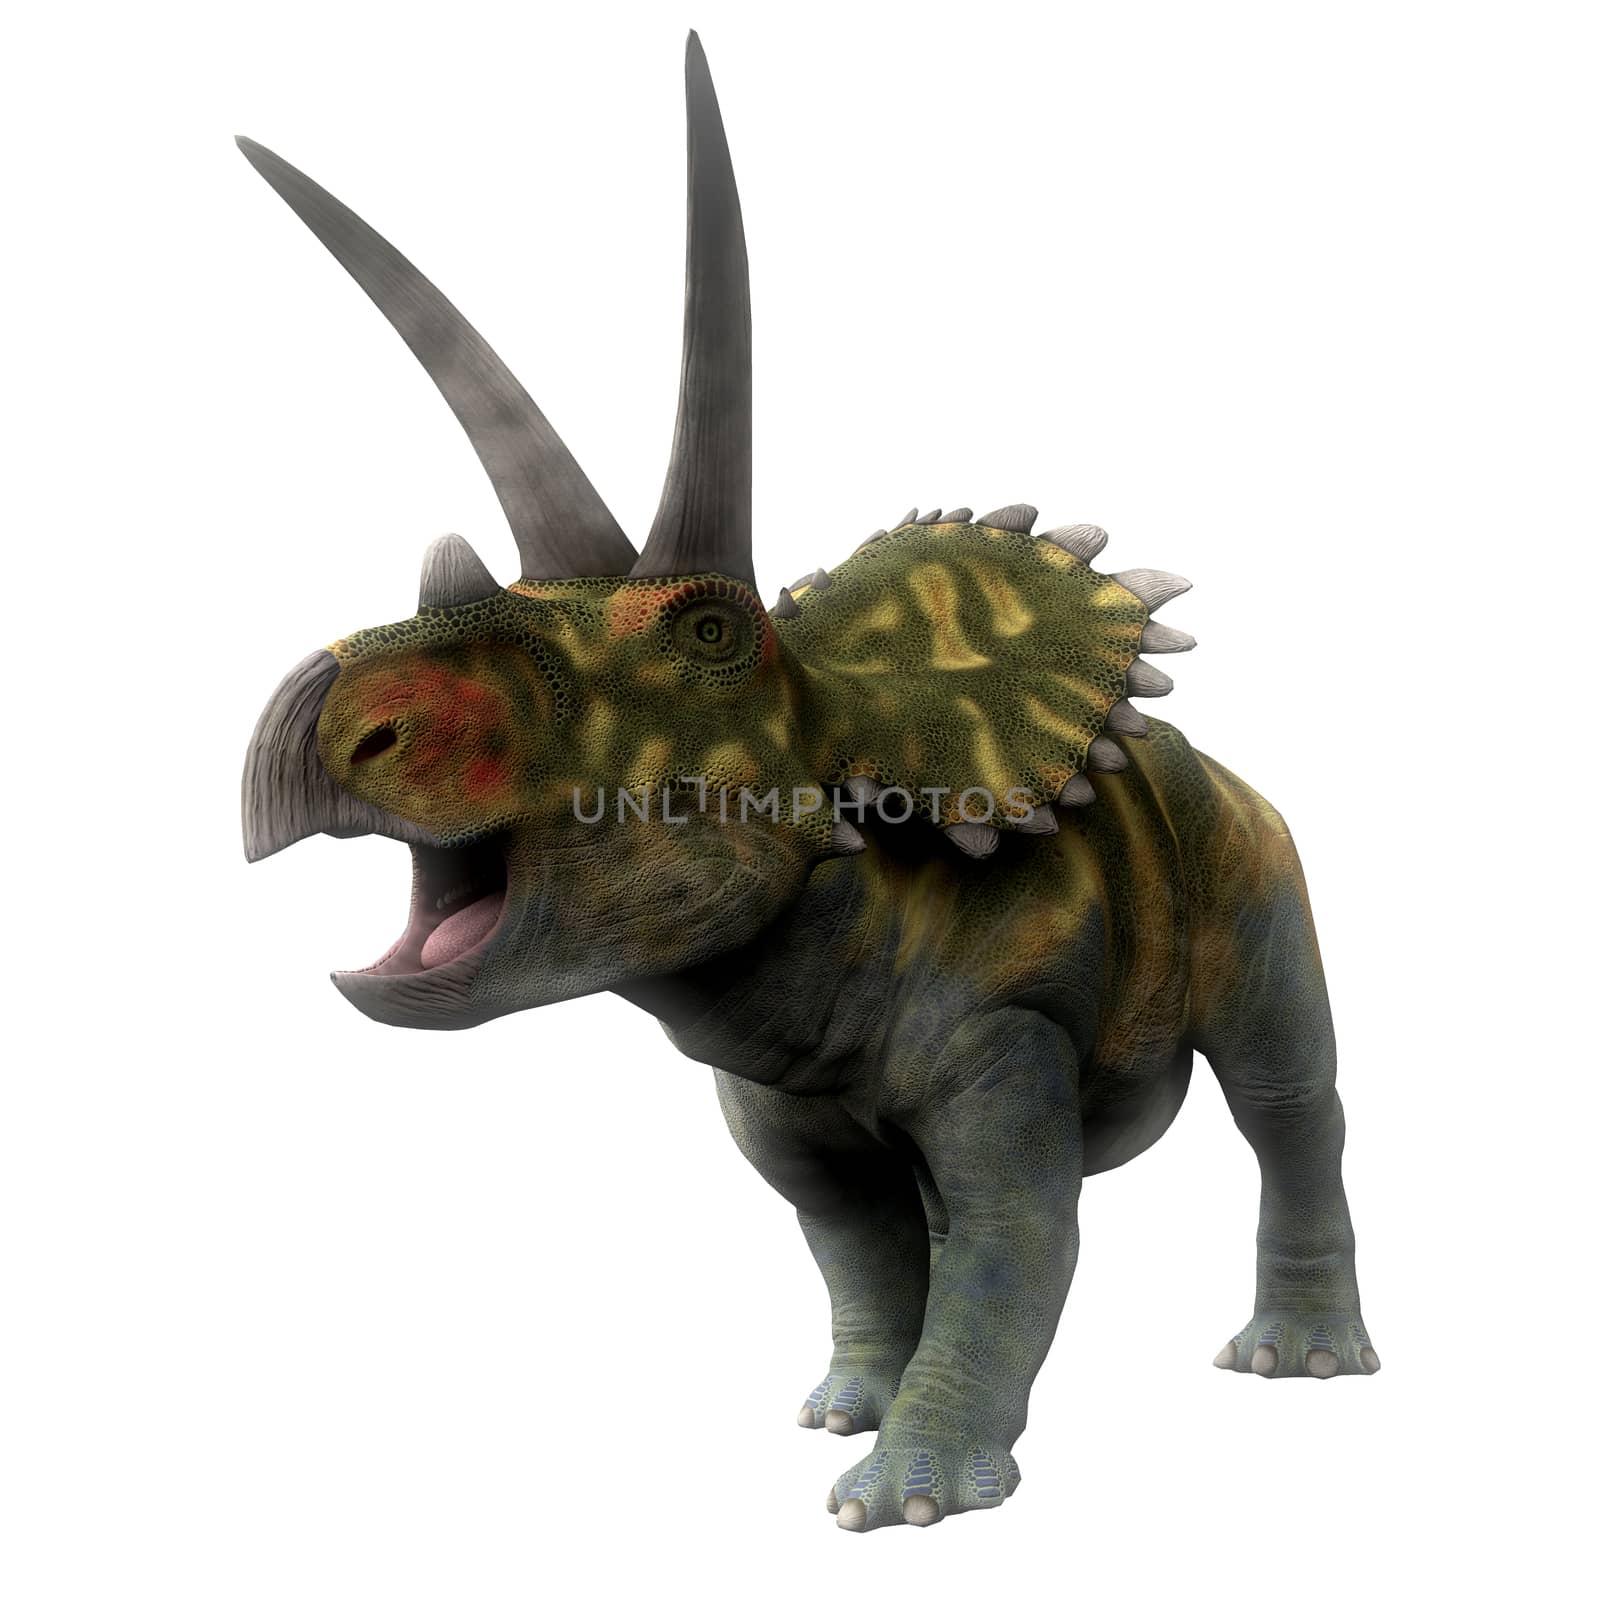 Coahuilaceratops was a ceratopsian herbivorous dinosaur that lived in the Cretaceous Period of Mexico.